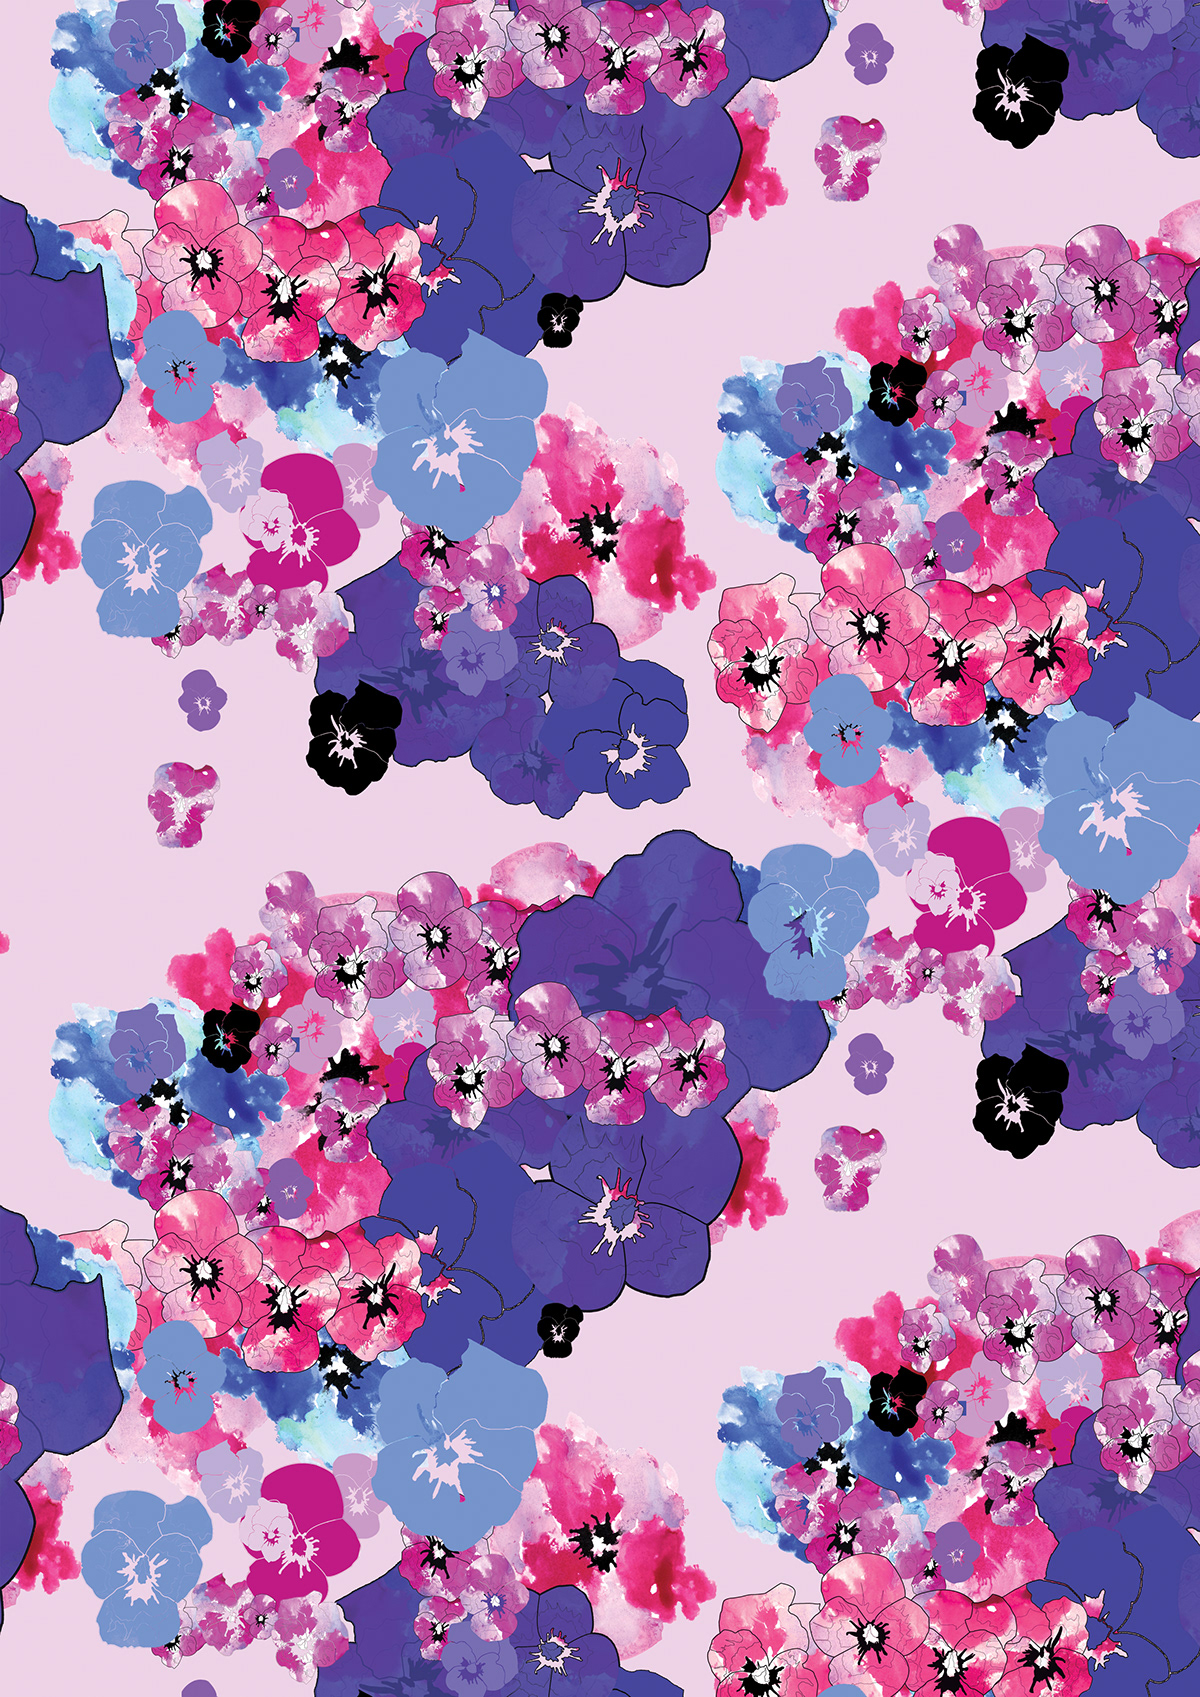 Flowers print textile pattern repeat